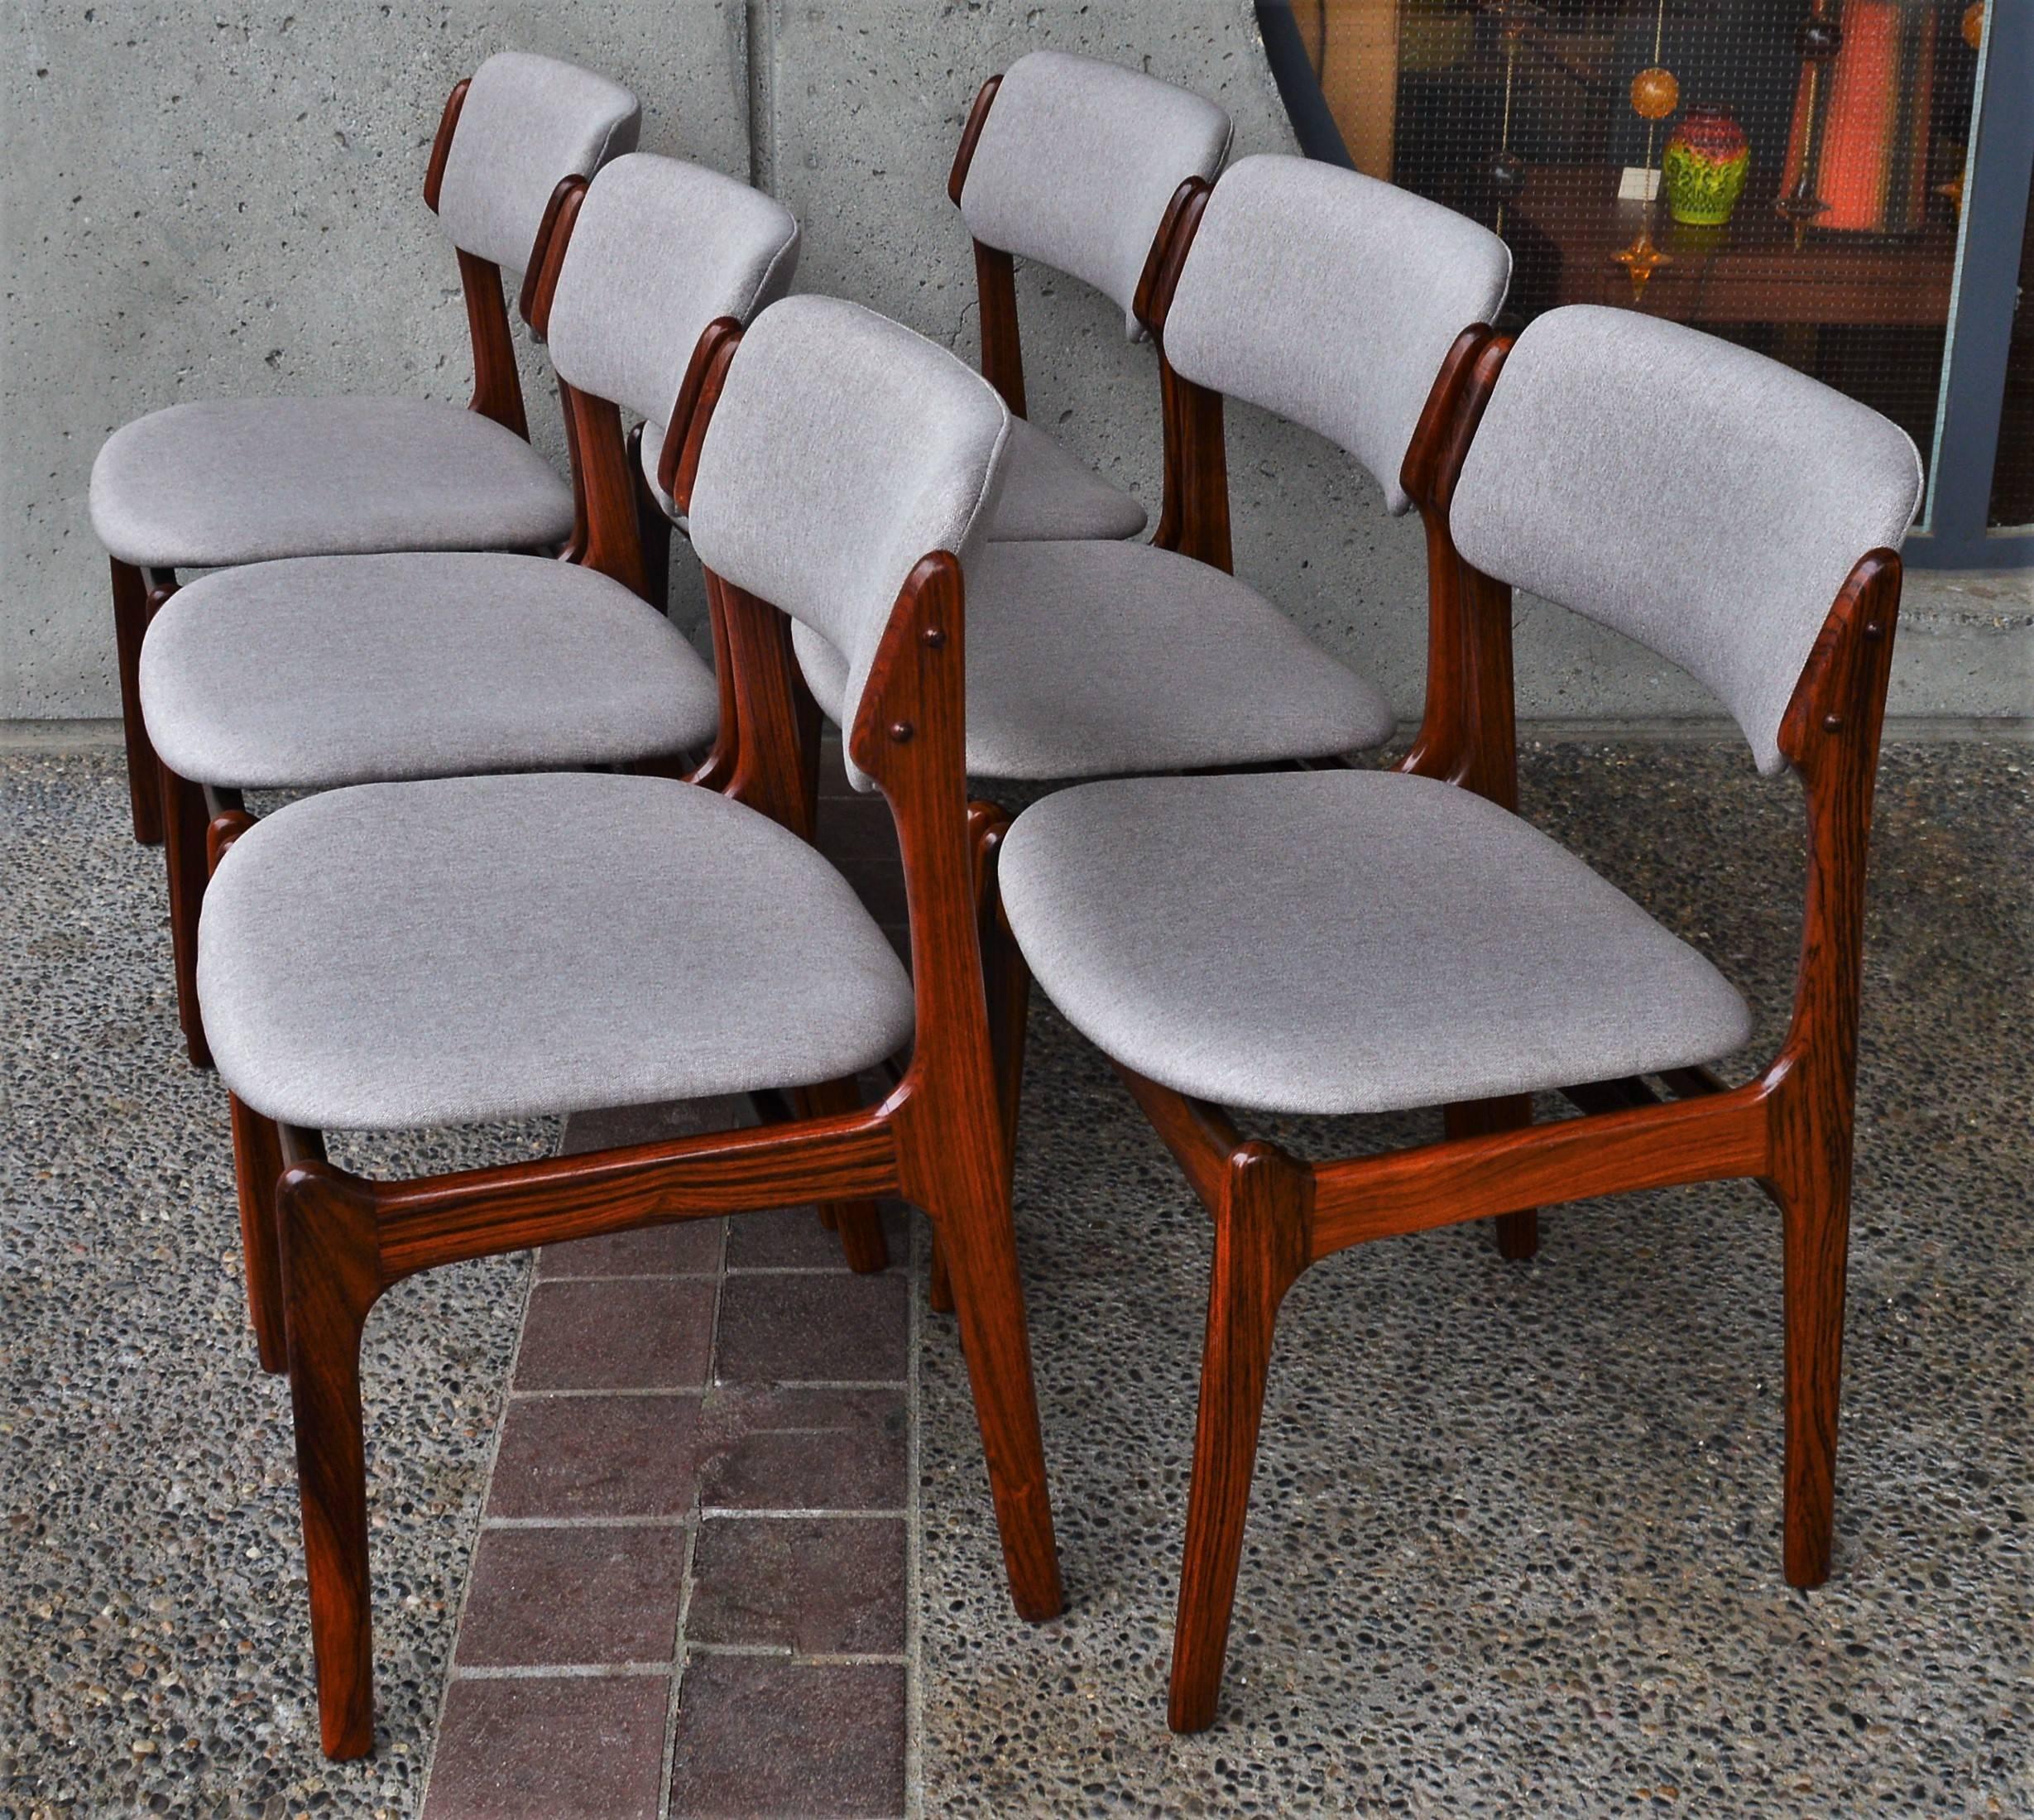 This gorgeous set of early Erik Buch model 49 rosewood dining chairs are renowned for their amazing comfort with the perfect angle of the upholstered backrest and the slight hug of the curved seat. While also being ergonomic, they also have stunning